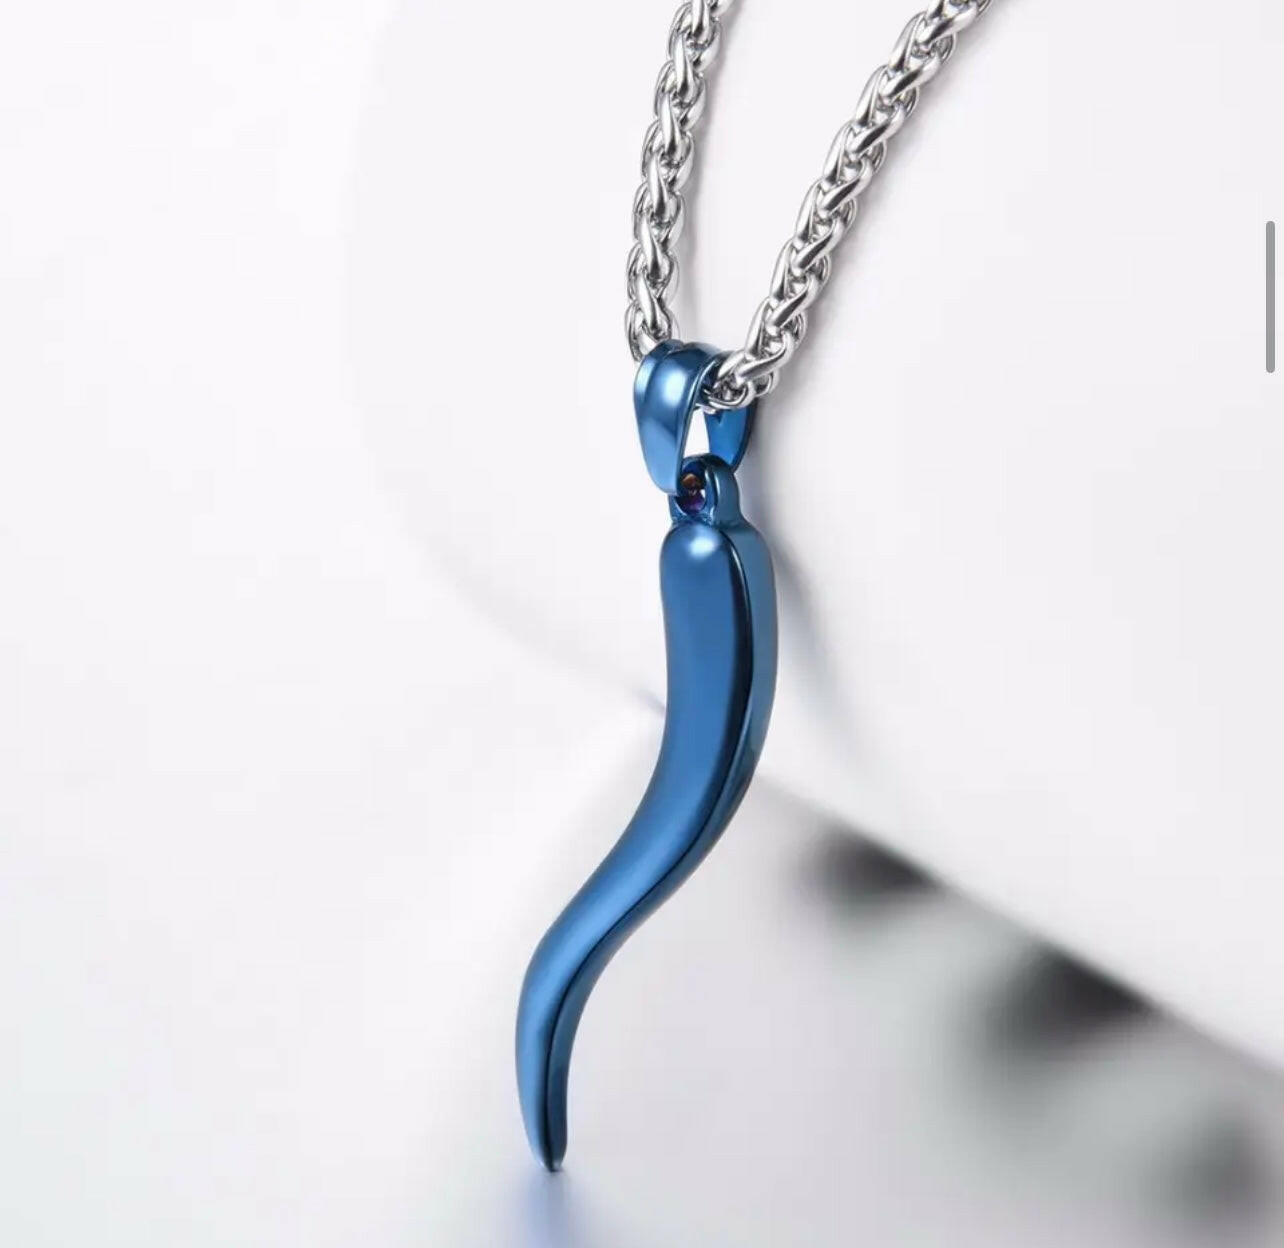 1 Italian Horn Necklace in Blue and Silver.